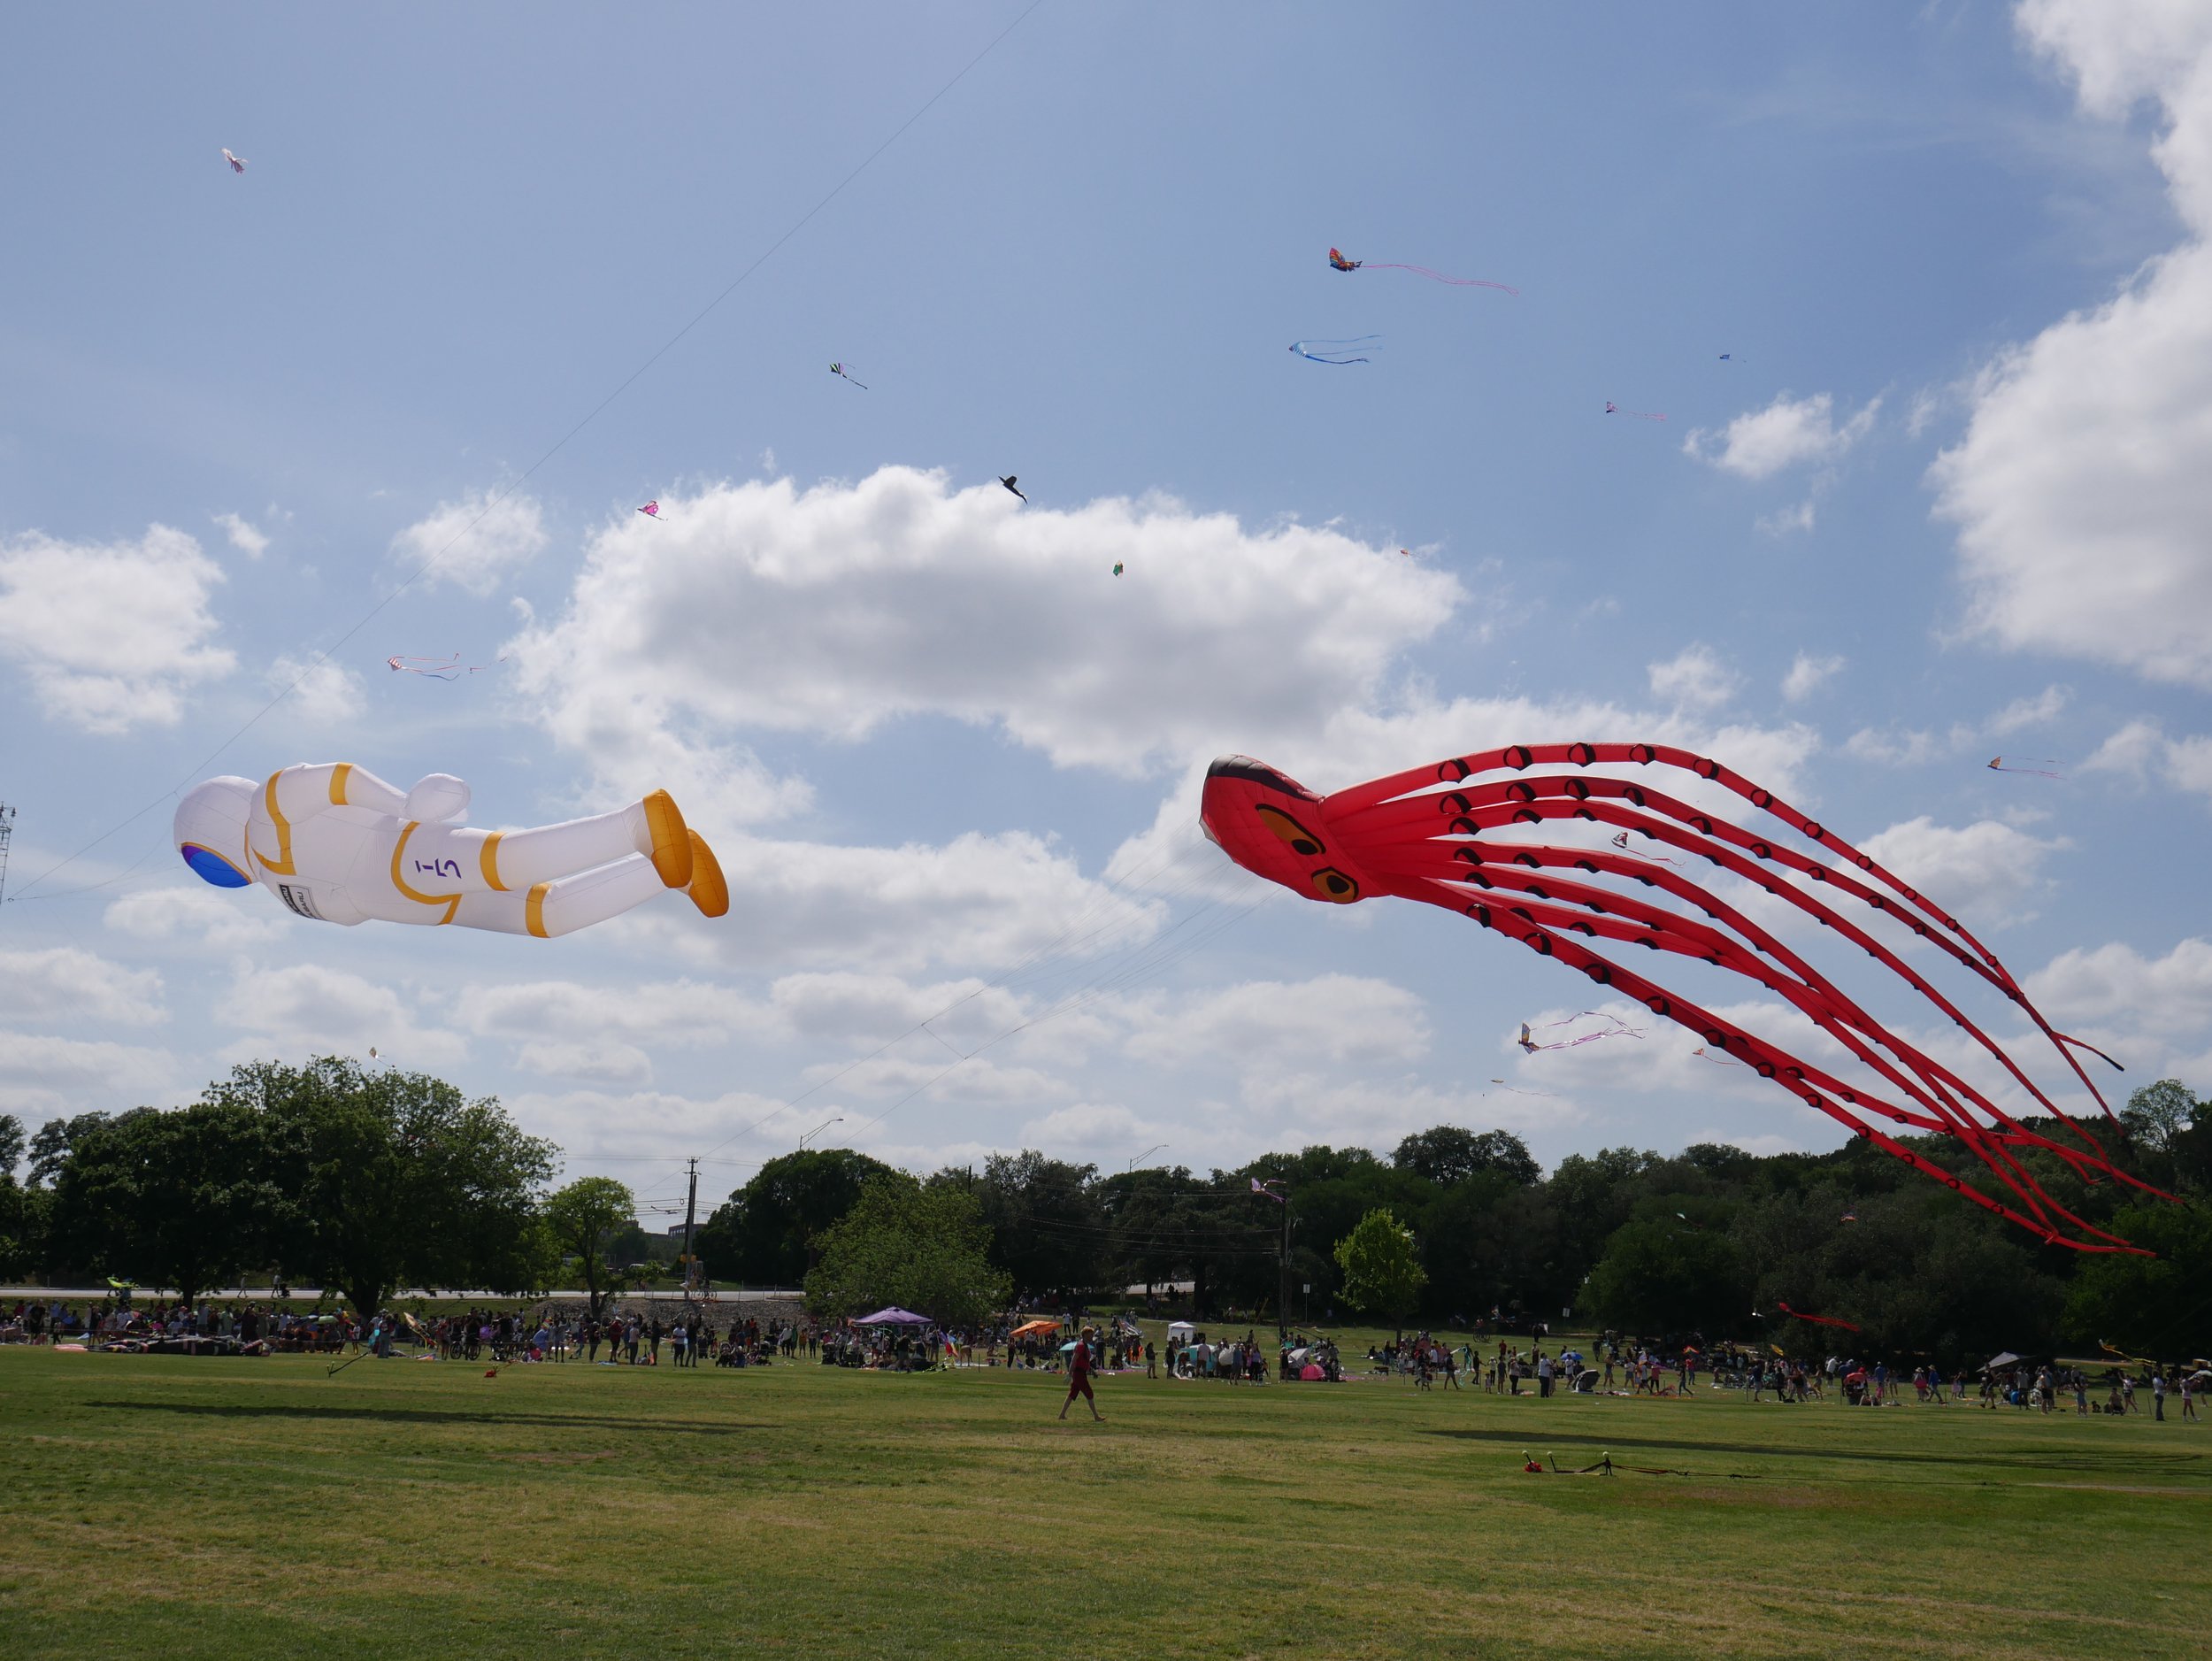  Giant astronaut and squid kites are flown by the Go Big Or Go Home kite group at the Kite Festival, Sunday, April 14, 2023, at Zilker Park in Austin, Texas. 